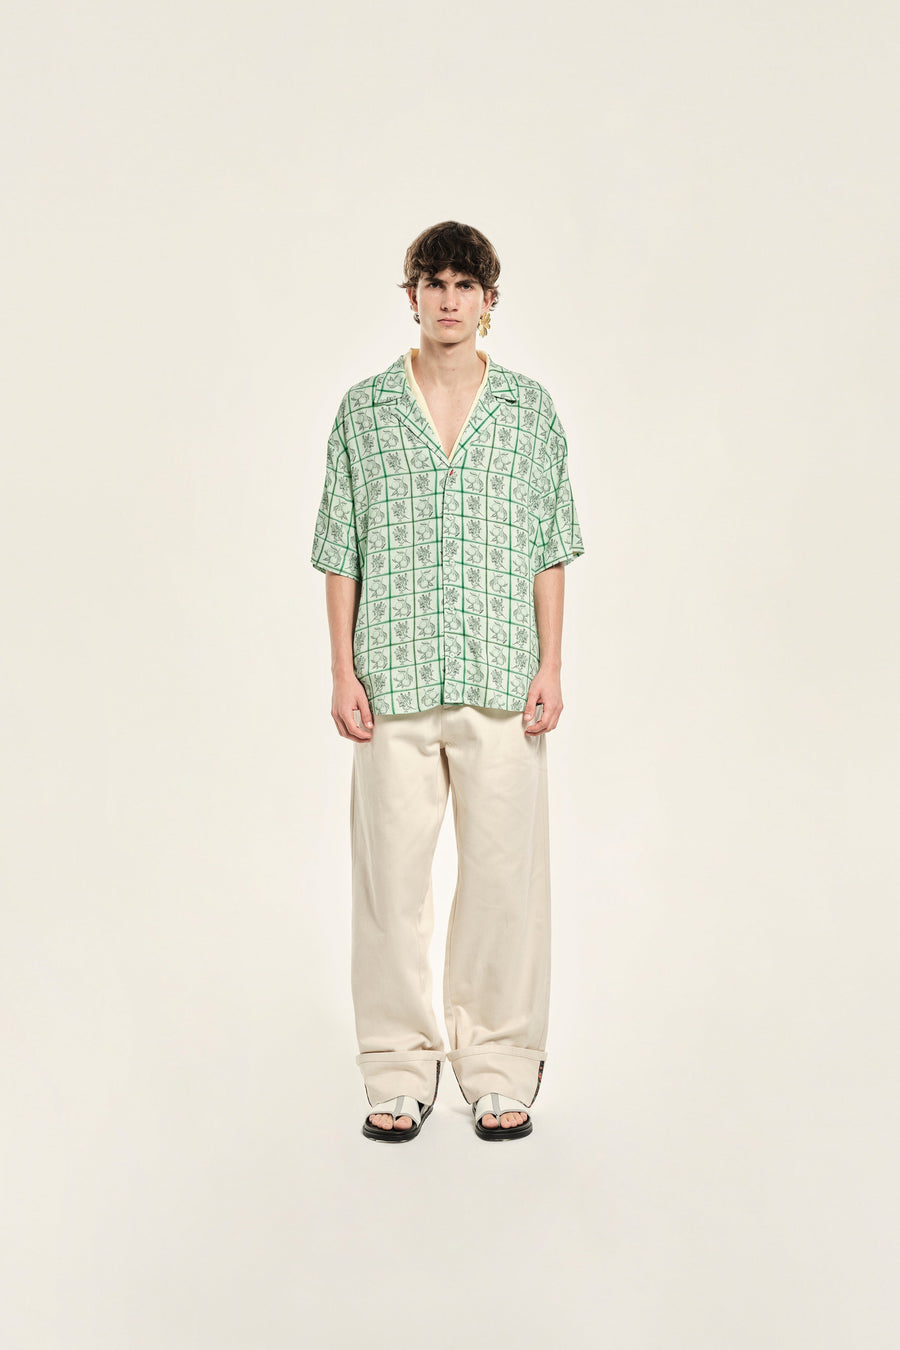 ANDERSON - Straight-leg pants with folded hems